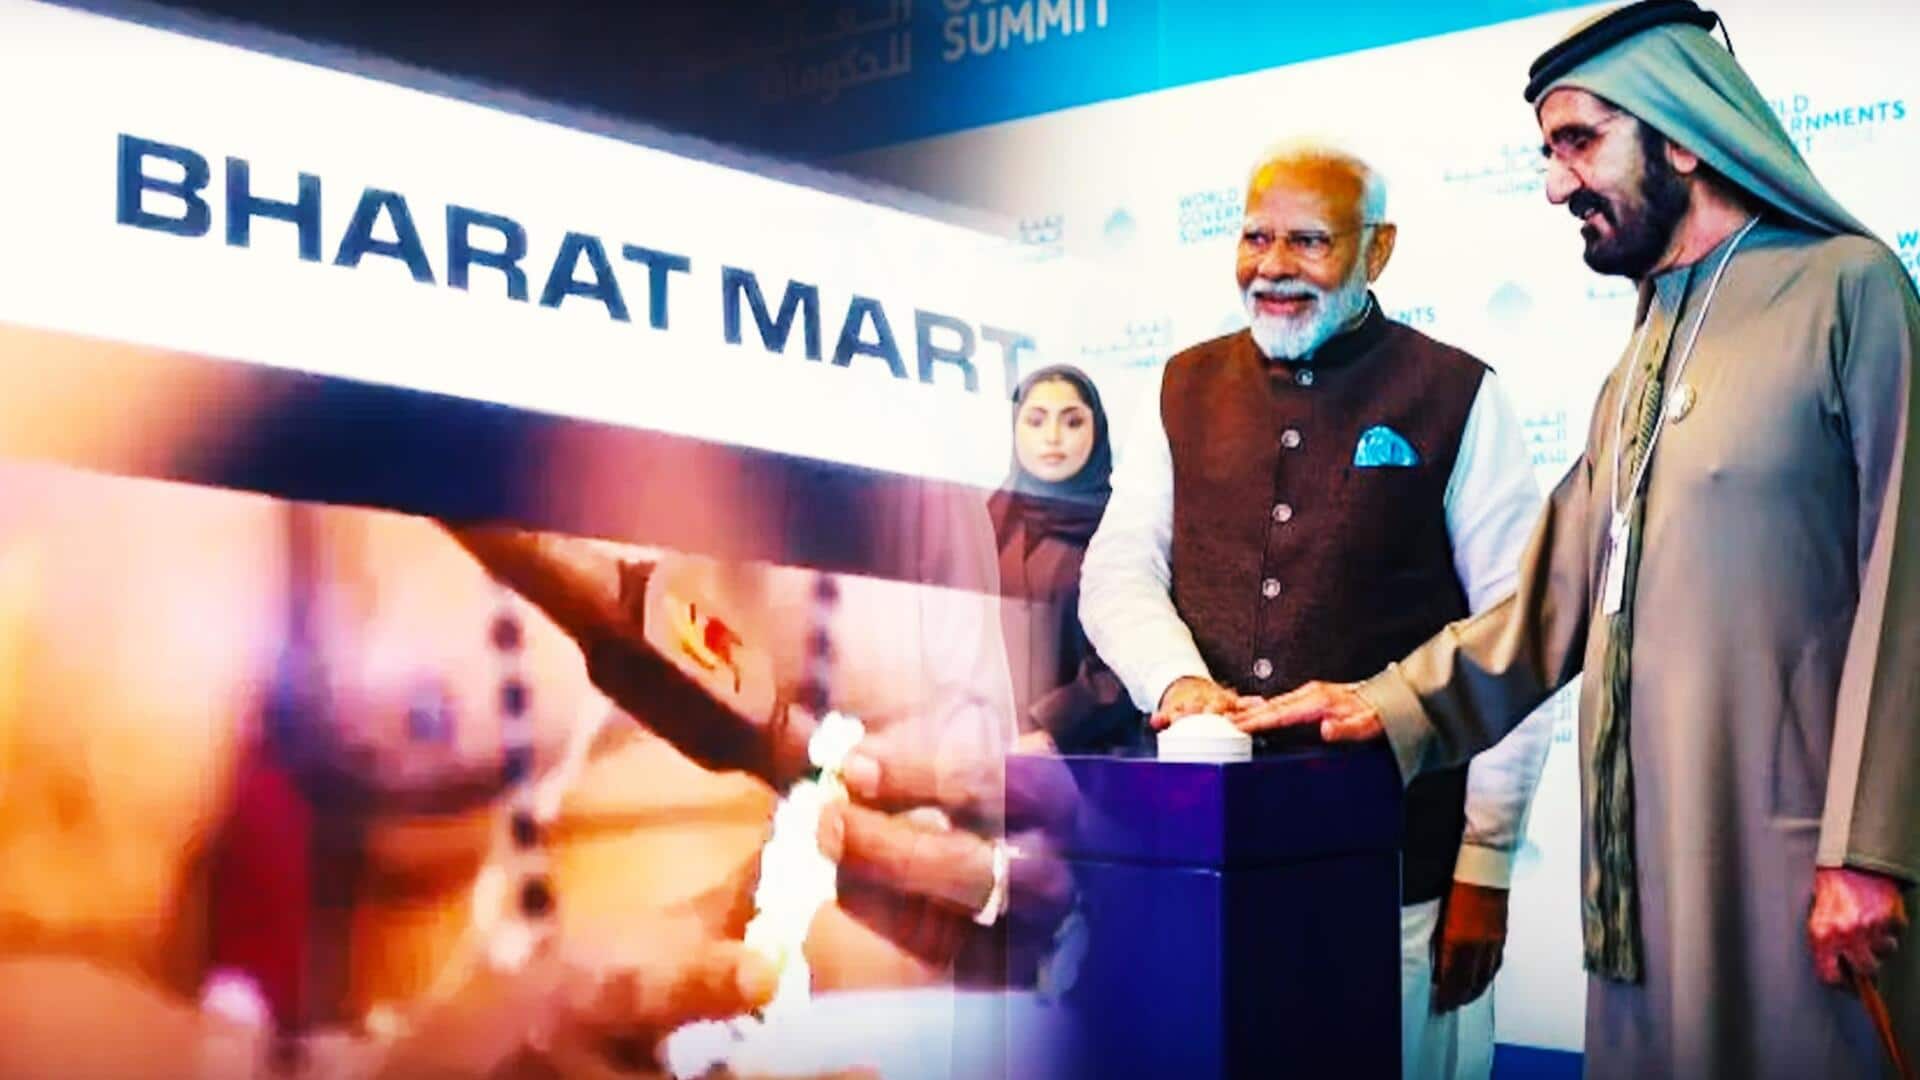 Bharat Mart: All about India's mega project in UAE